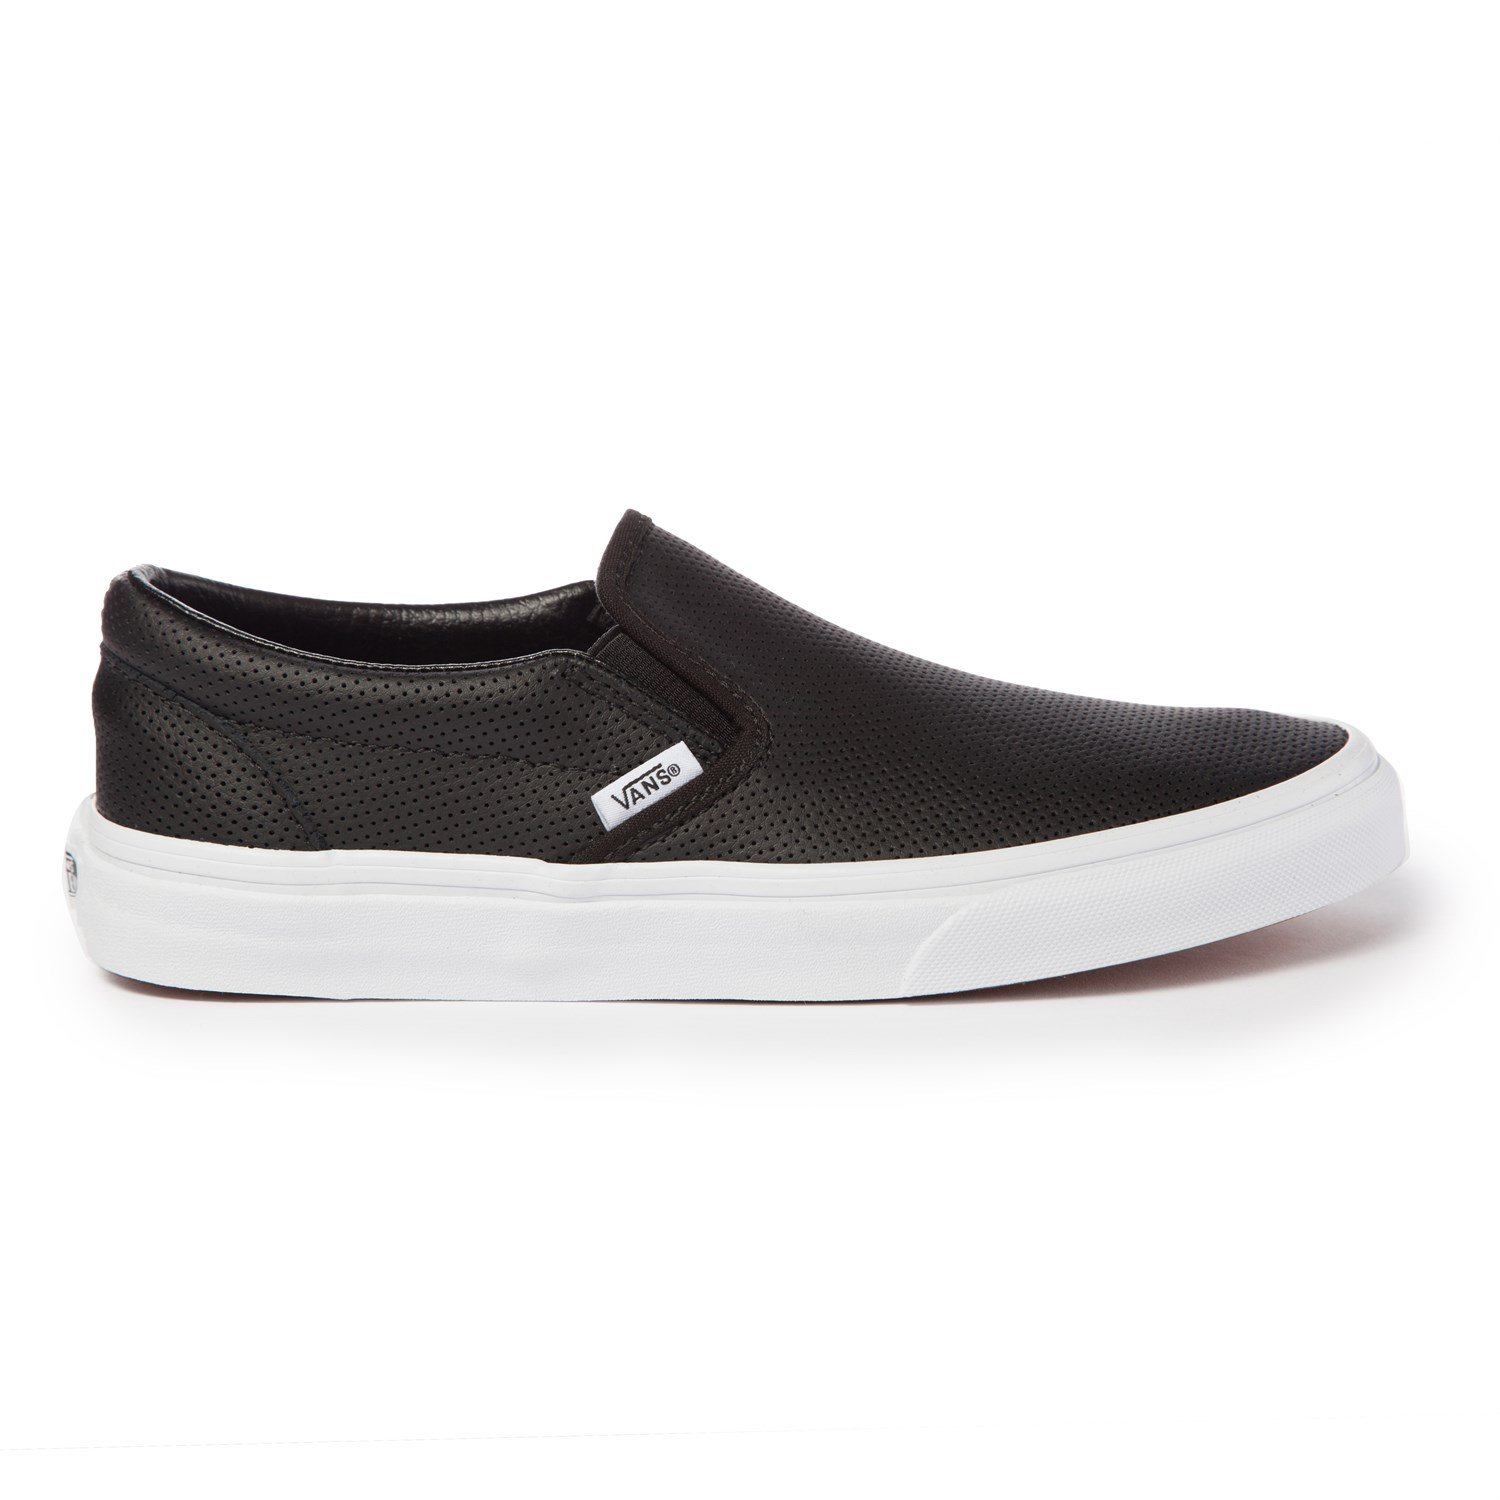 Vans Perf Leather Slip-On Shoes - Women 